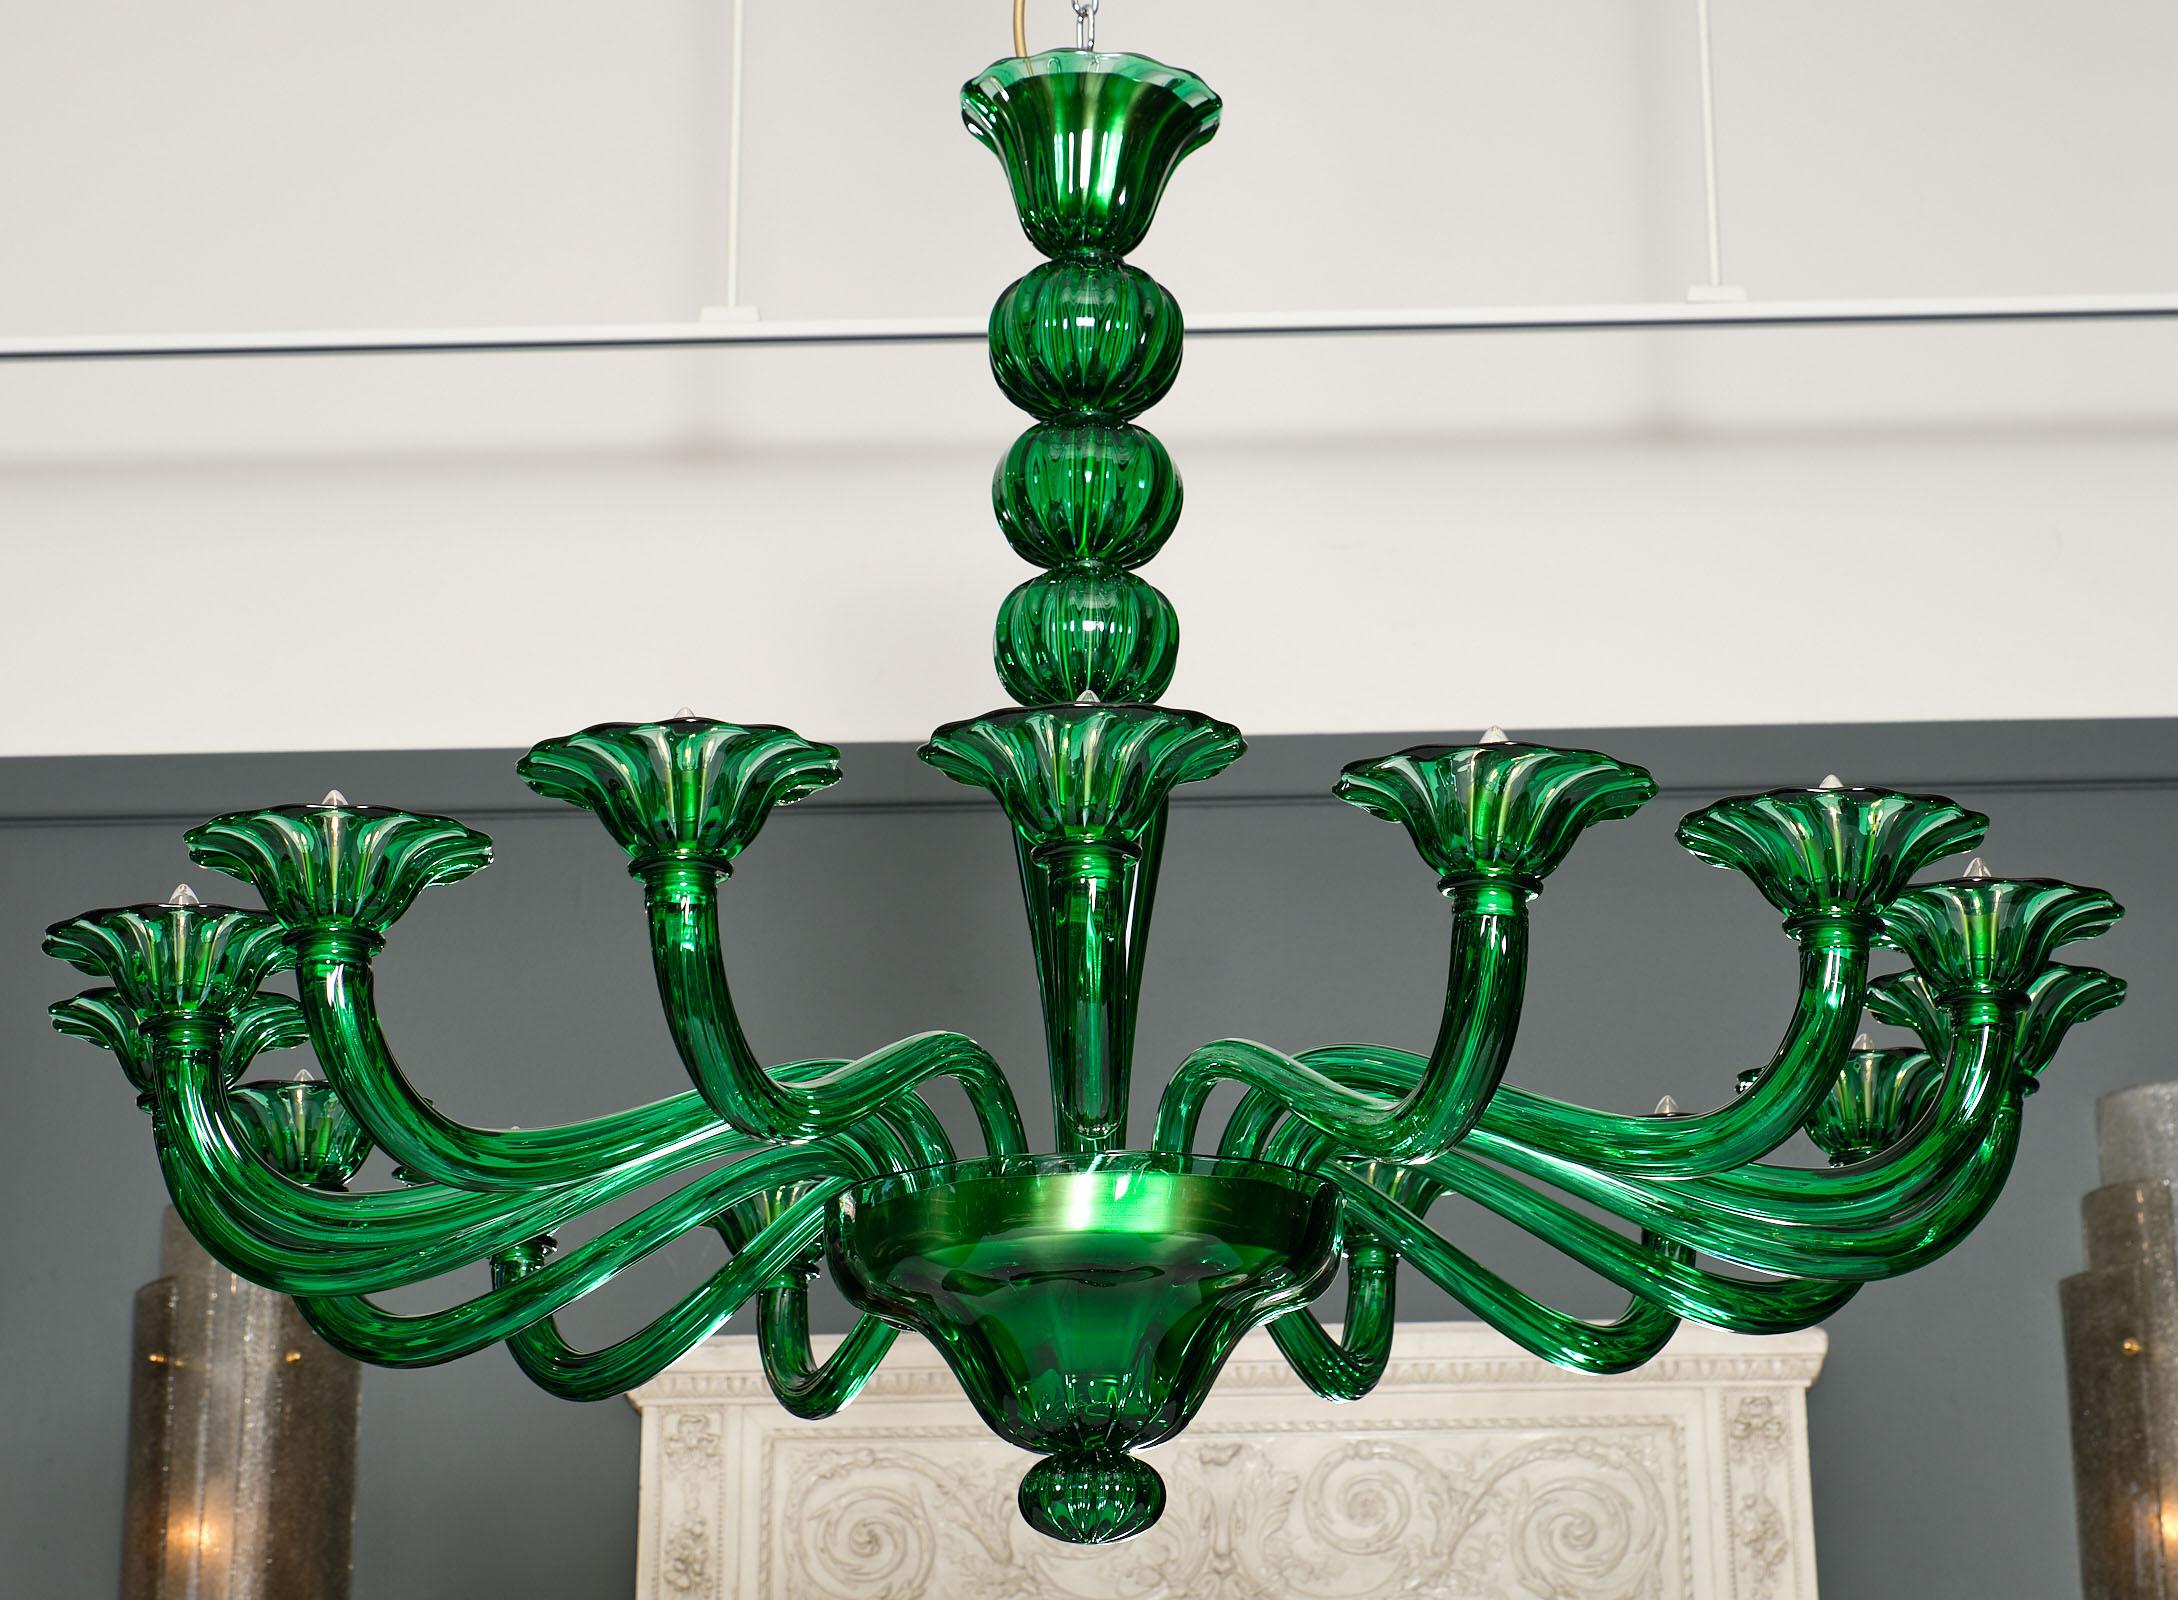 Stunning emerald green Murano glass chandelier made of hand blown glass and featuring 16 arms. This exquisite fixture has an intricate process consisting of two passes with the glass for thickness. Then the piece is heated twice. The ribbing is done